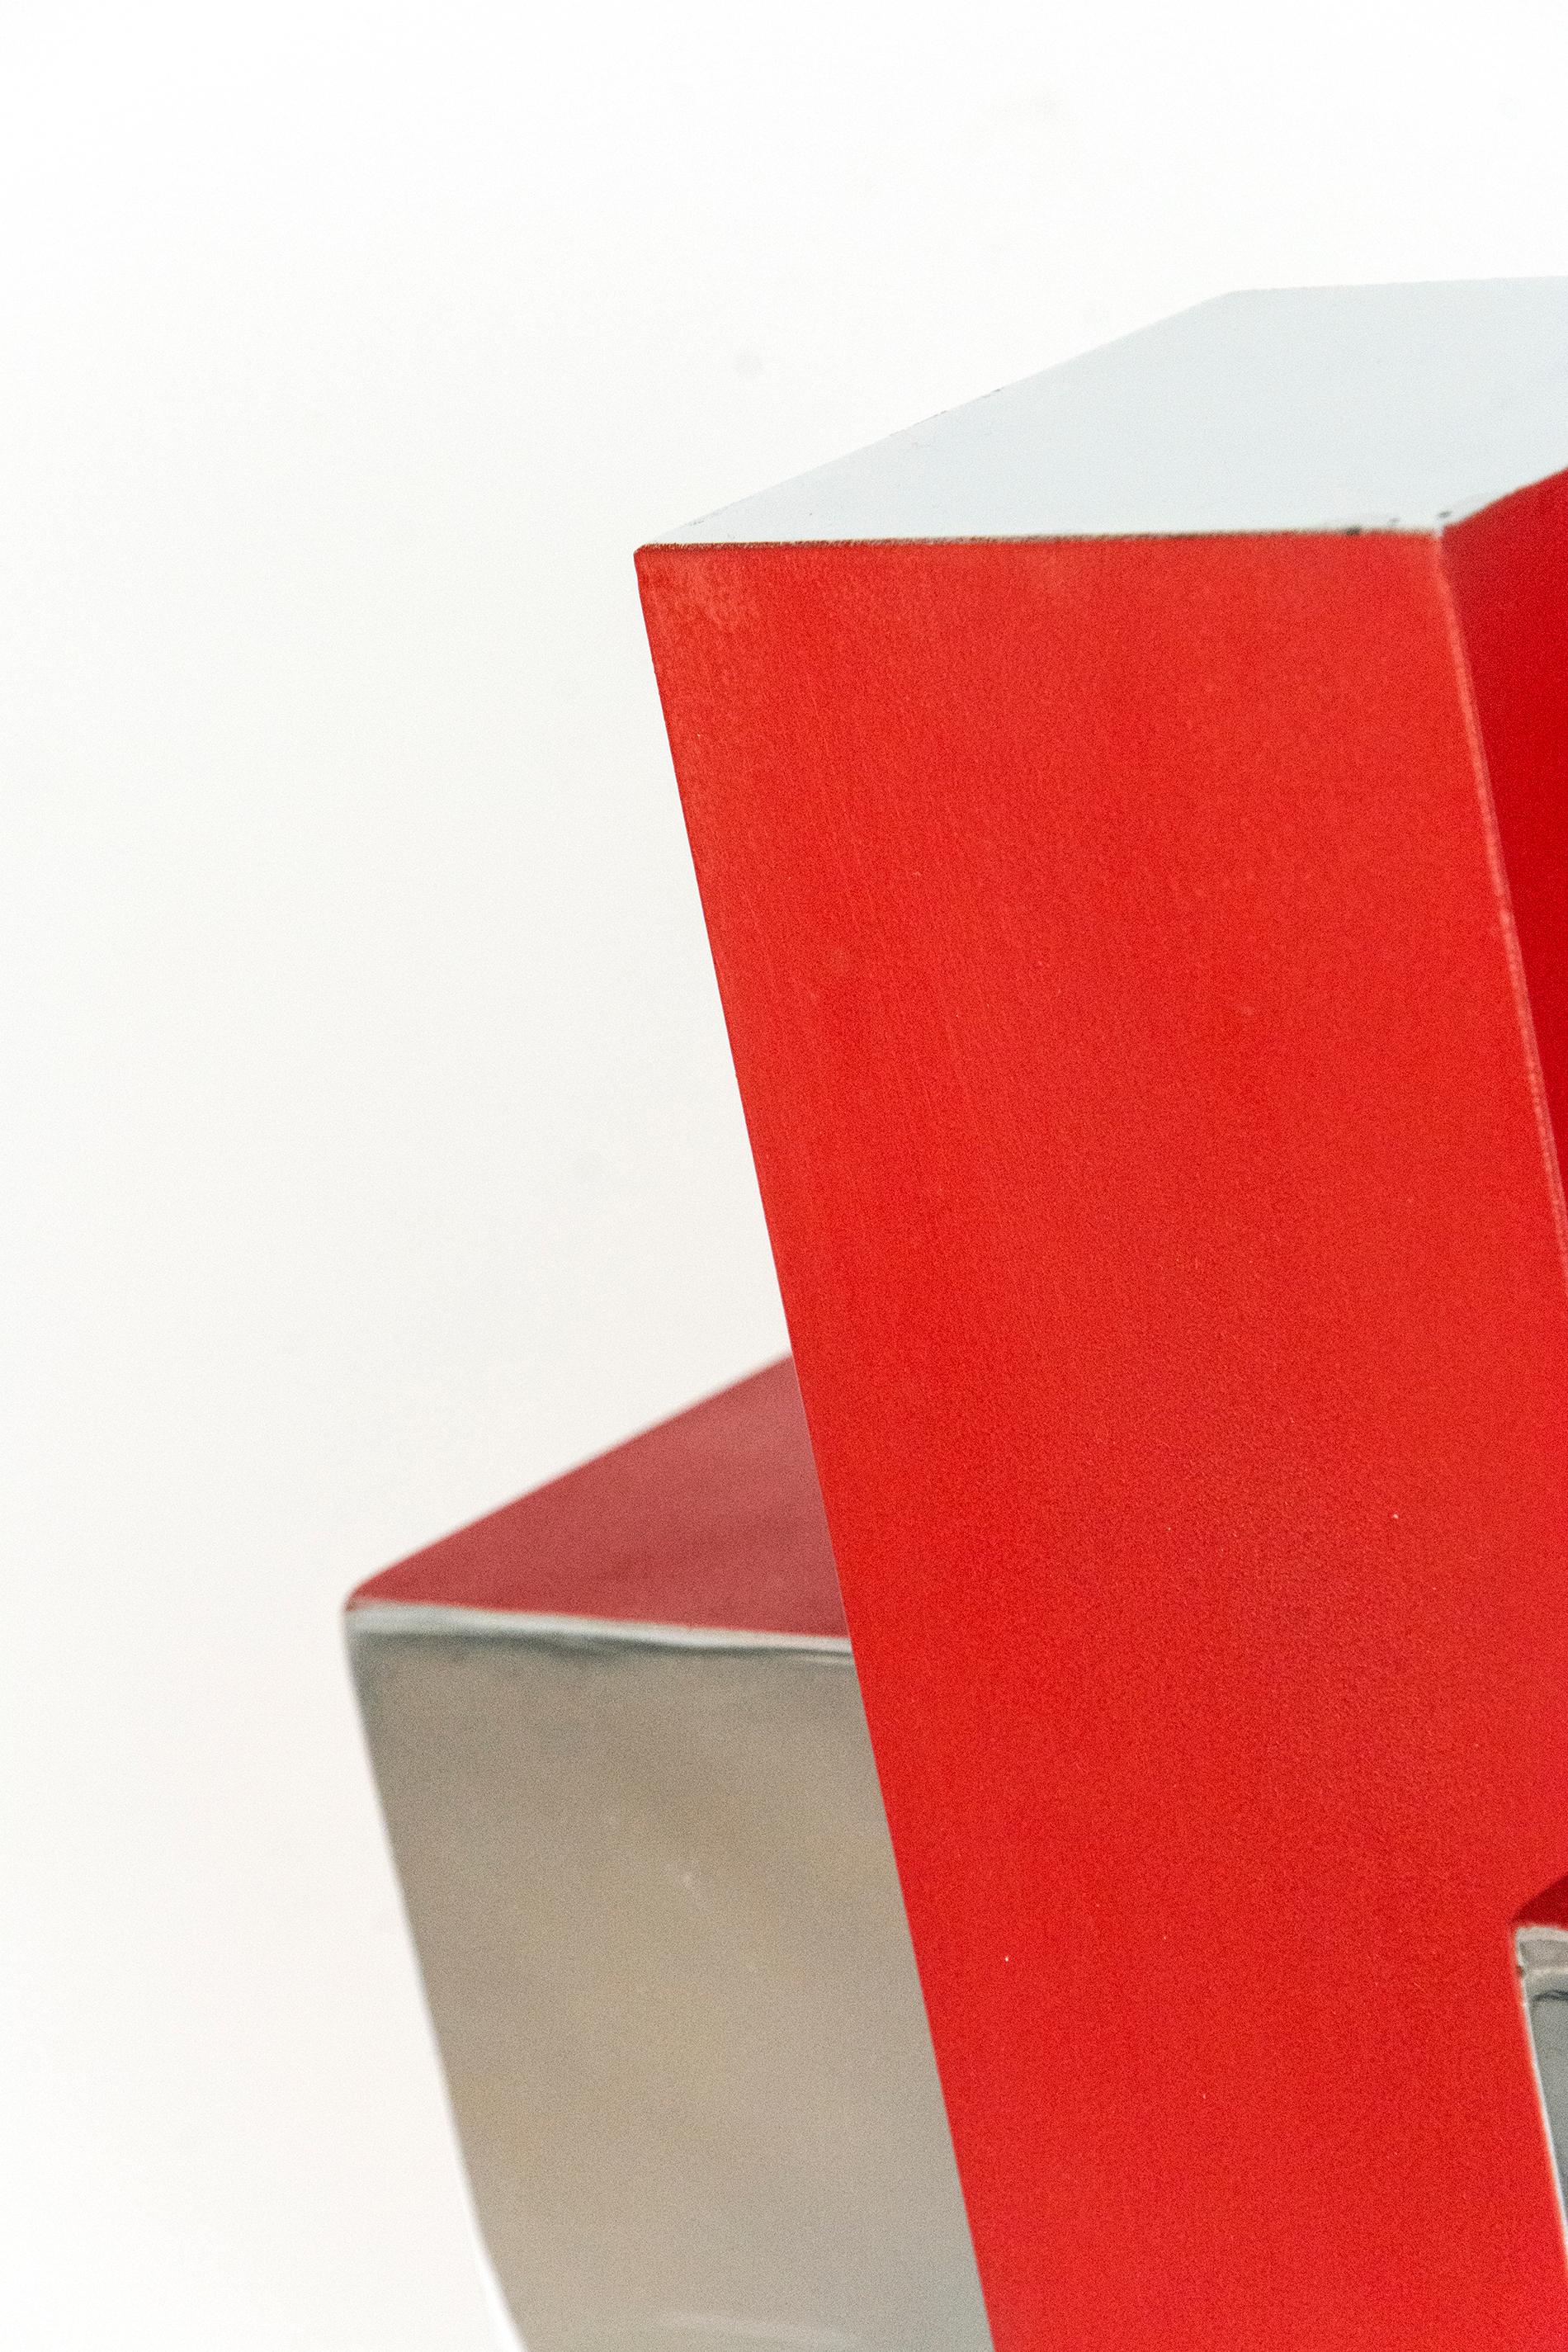 Interesecting geometry in poppy red and polished aluminum form a dynamic whole in this modern sculpture by Philippe Pallafray. This work is number 2 in an edition of 10, available by commission, please allow 6 - 8 weeks for delivery.

Philippe